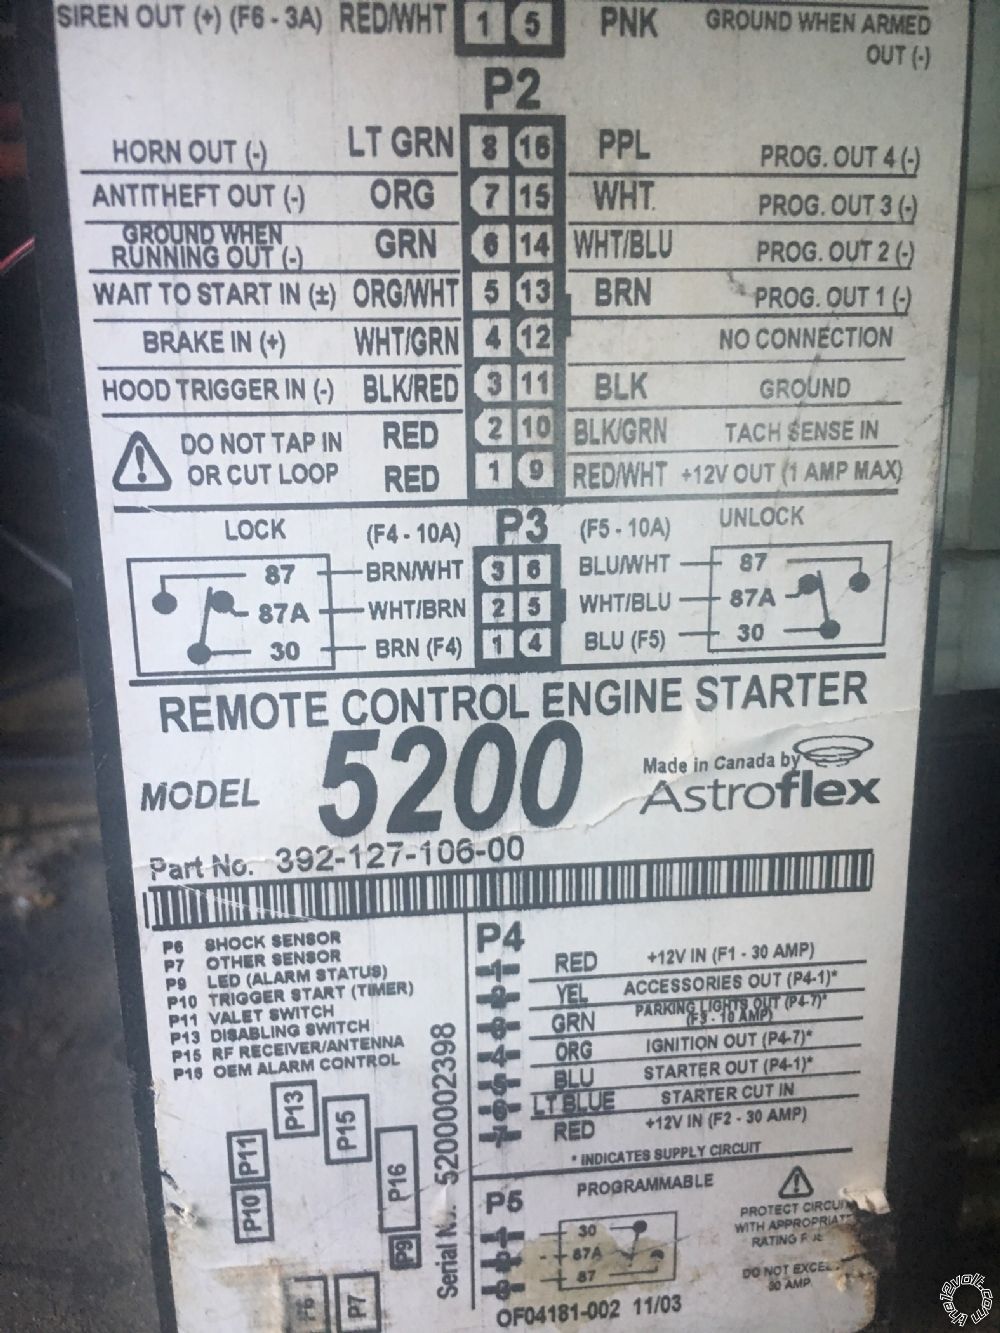 Remote Needed for Astroflex 5200 -- posted image.